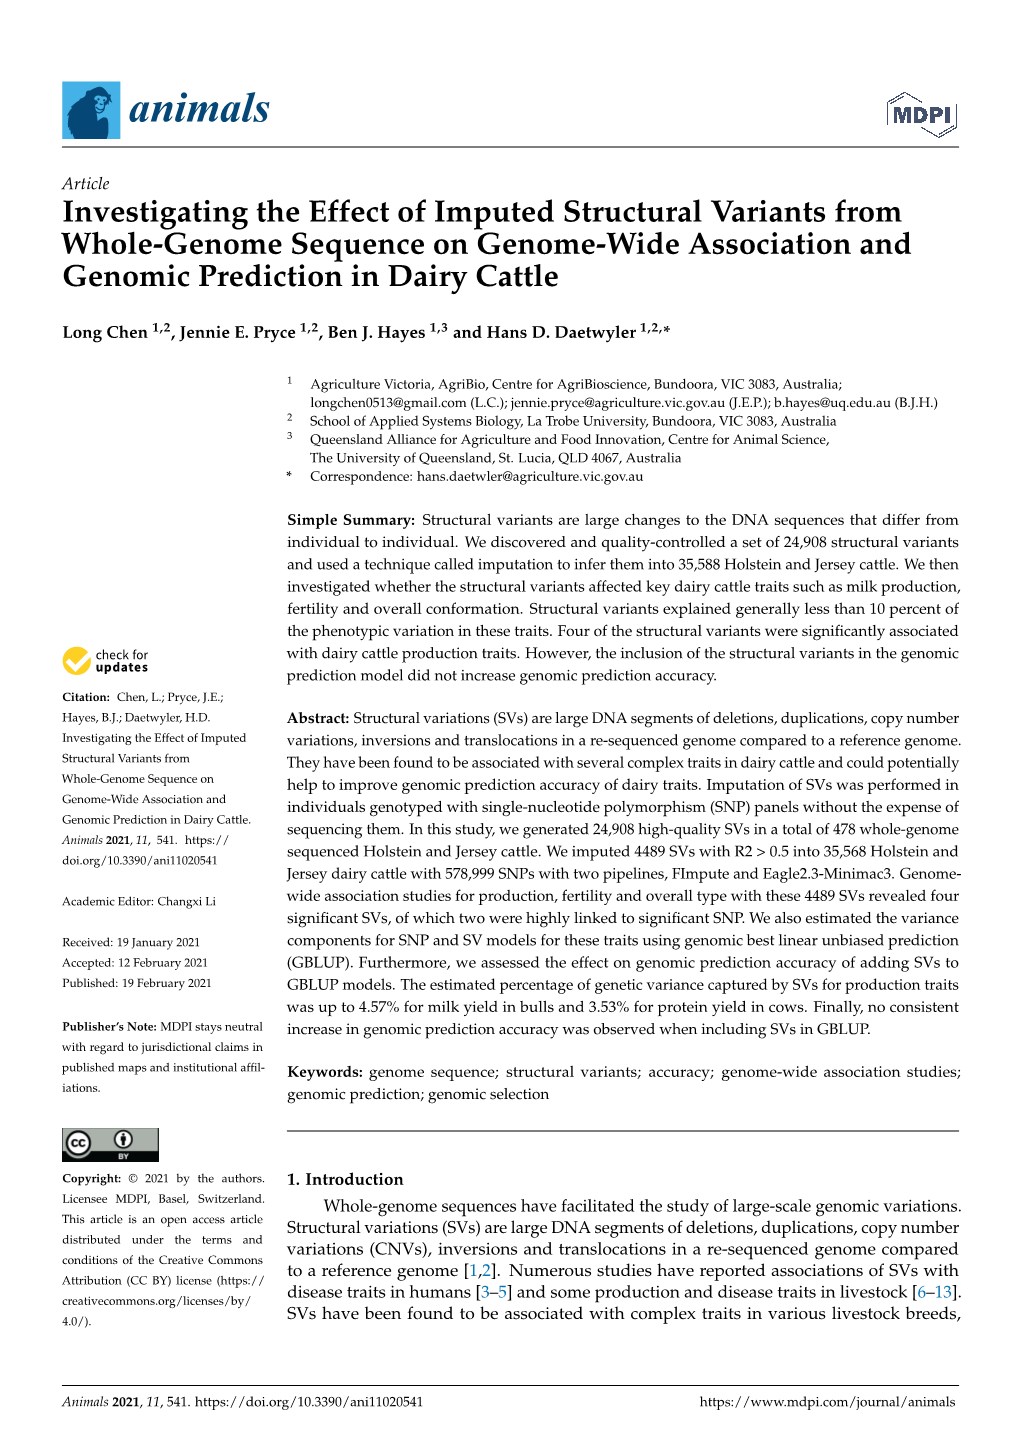 Investigating the Effect of Imputed Structural Variants from Whole-Genome Sequence on Genome-Wide Association and Genomic Prediction in Dairy Cattle